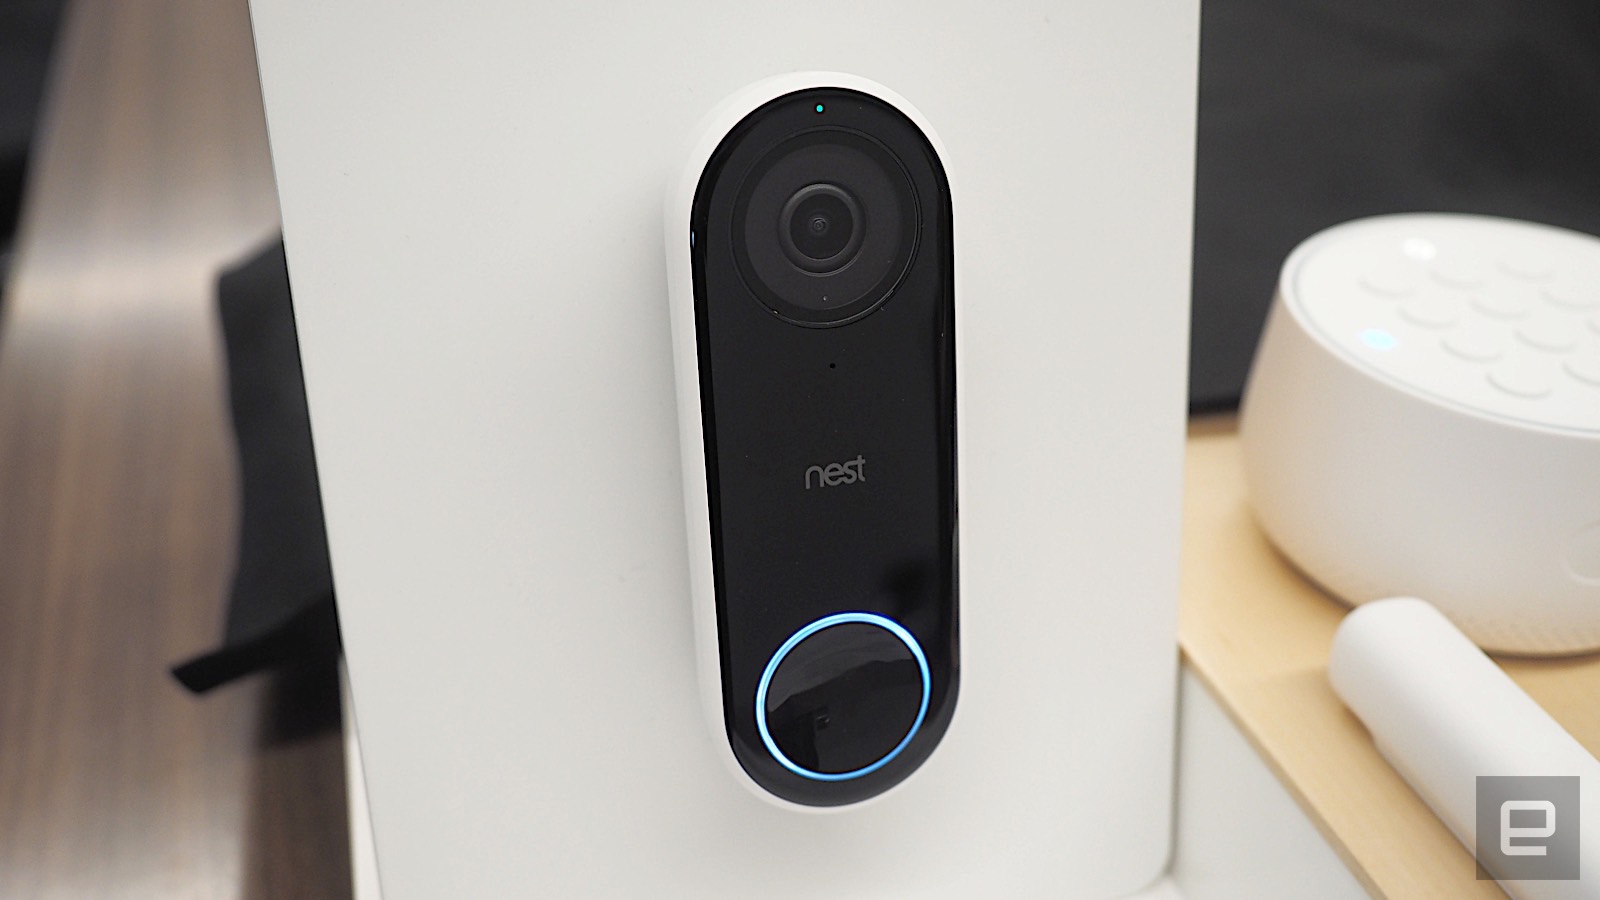 Nest's $229 video doorbell is a useful addition to its ecosystem | DeviceDaily.com